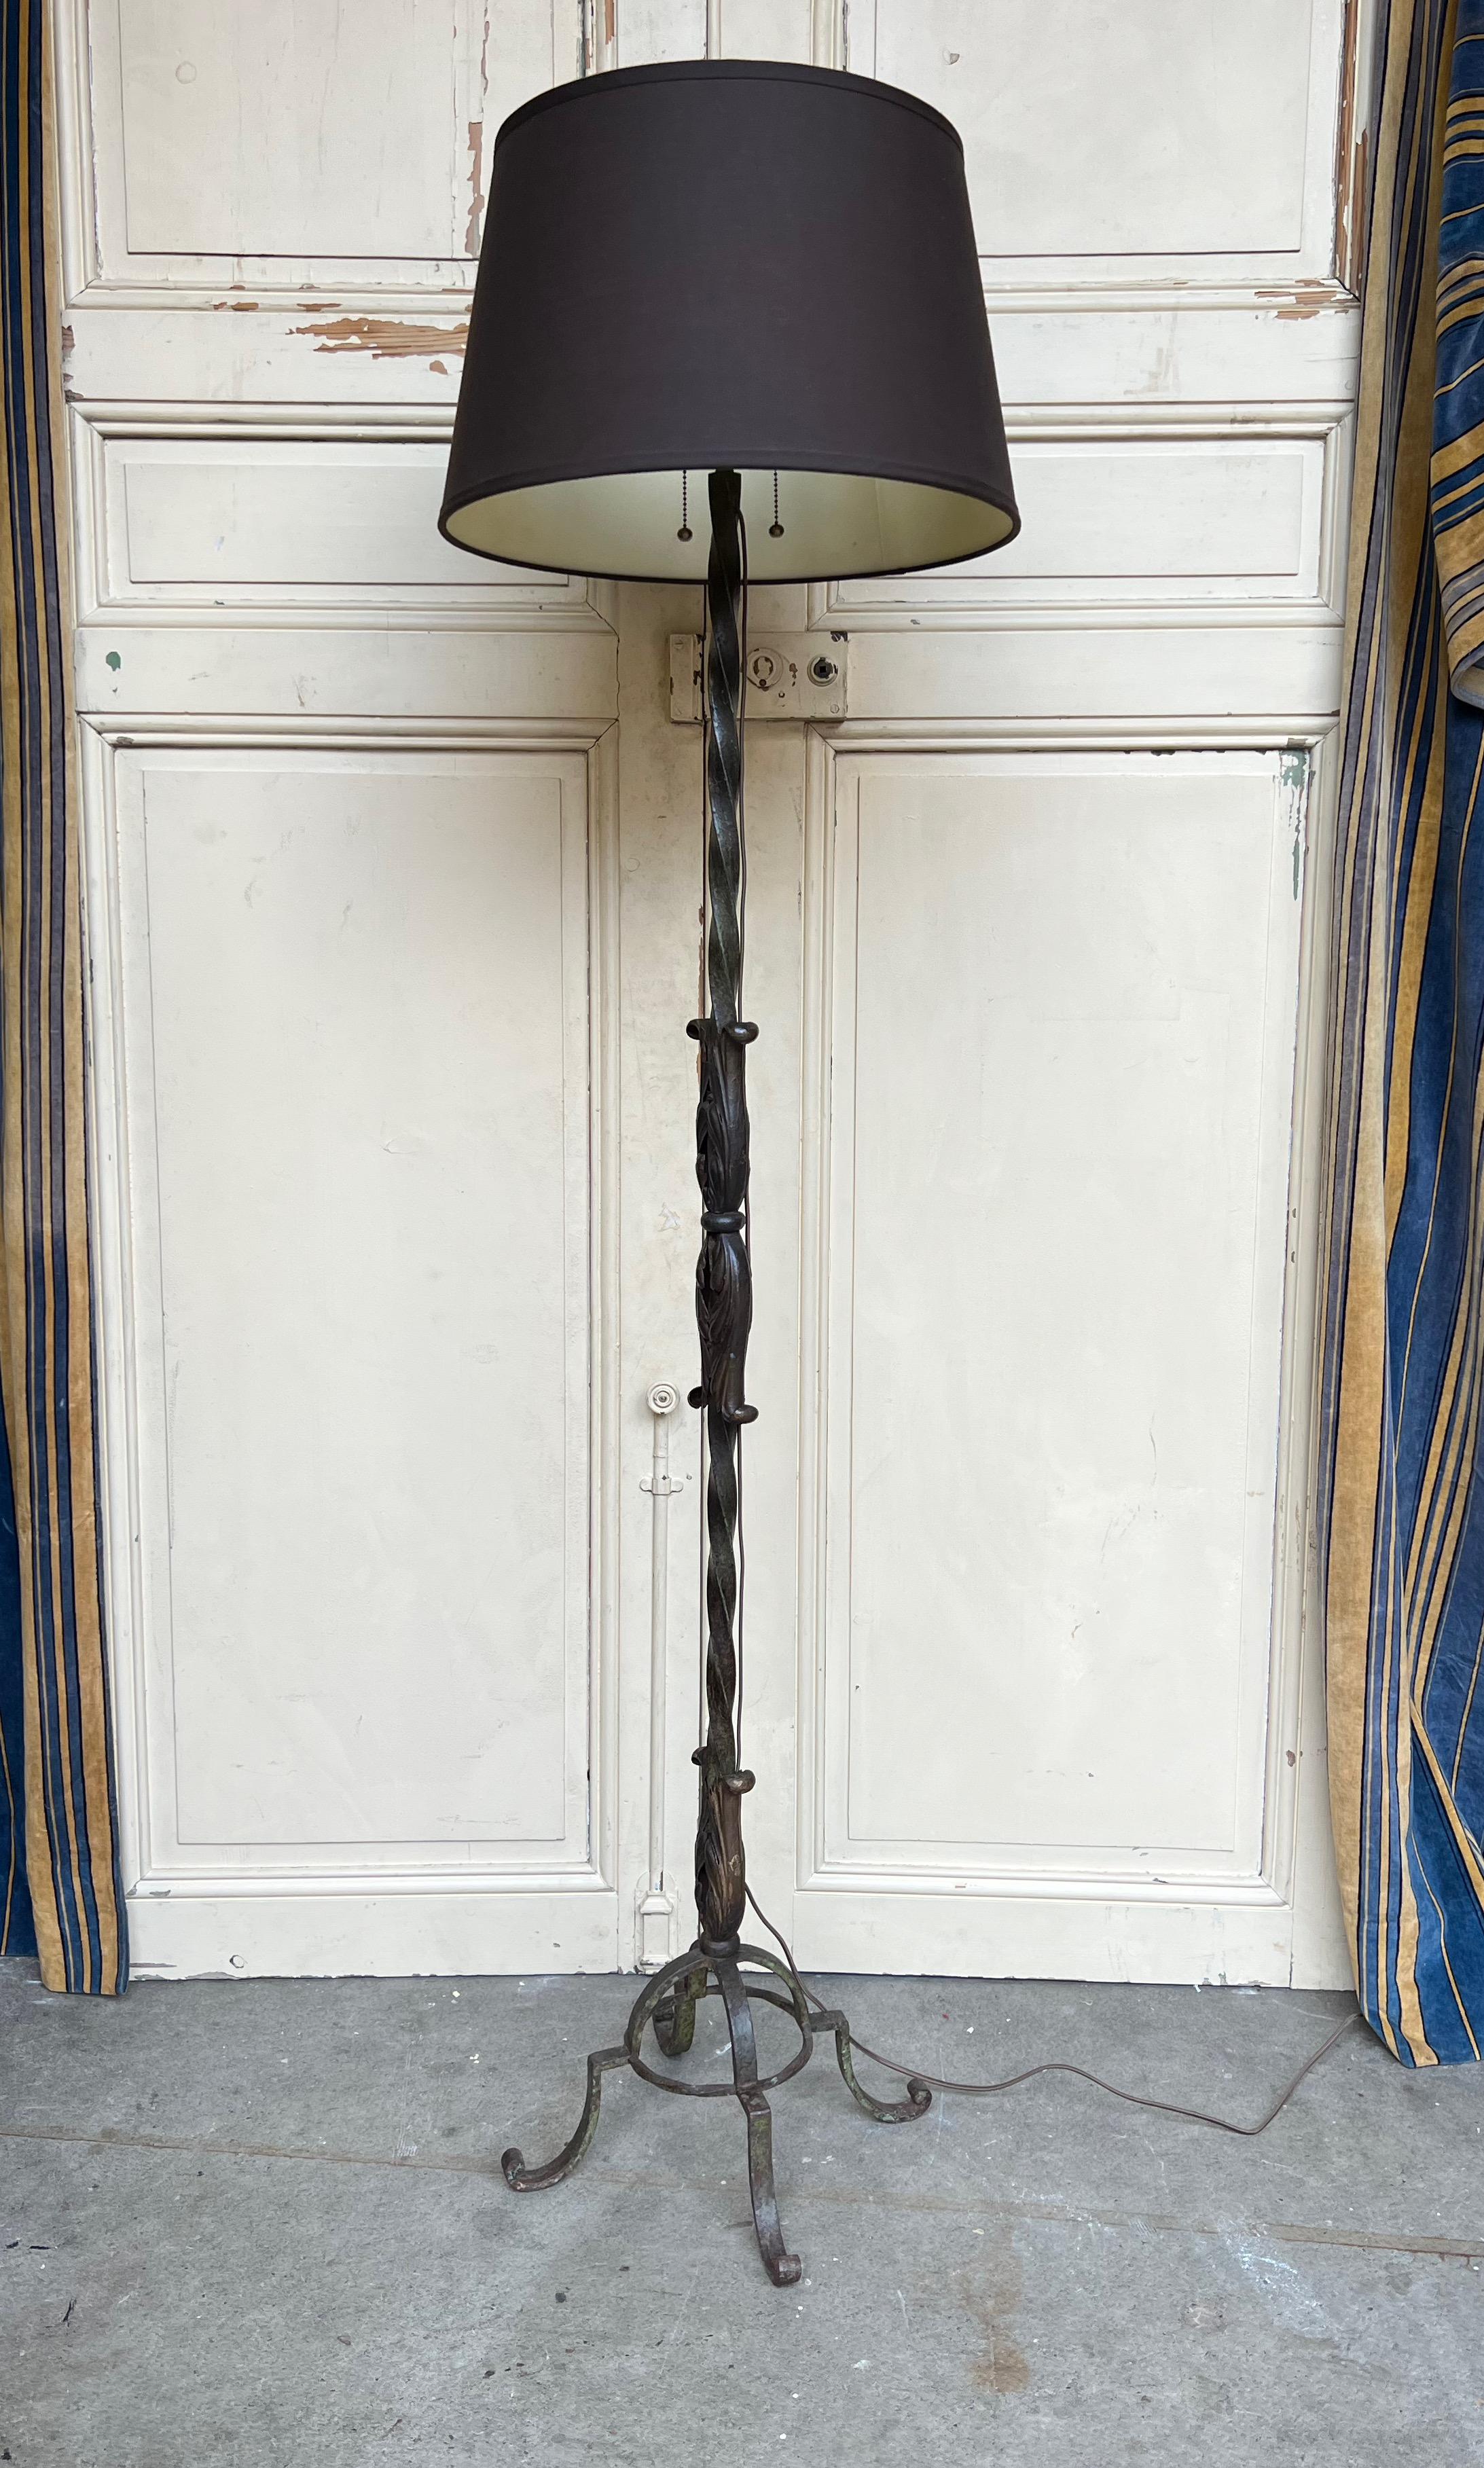 This exquisitely crafted French Art Deco floor lamp is made of solid wrought iron, featuring a vintage green patina with gold accents. The elegant four legged base supports an elaborately twisted stem with stately floral elements. The entire lamp